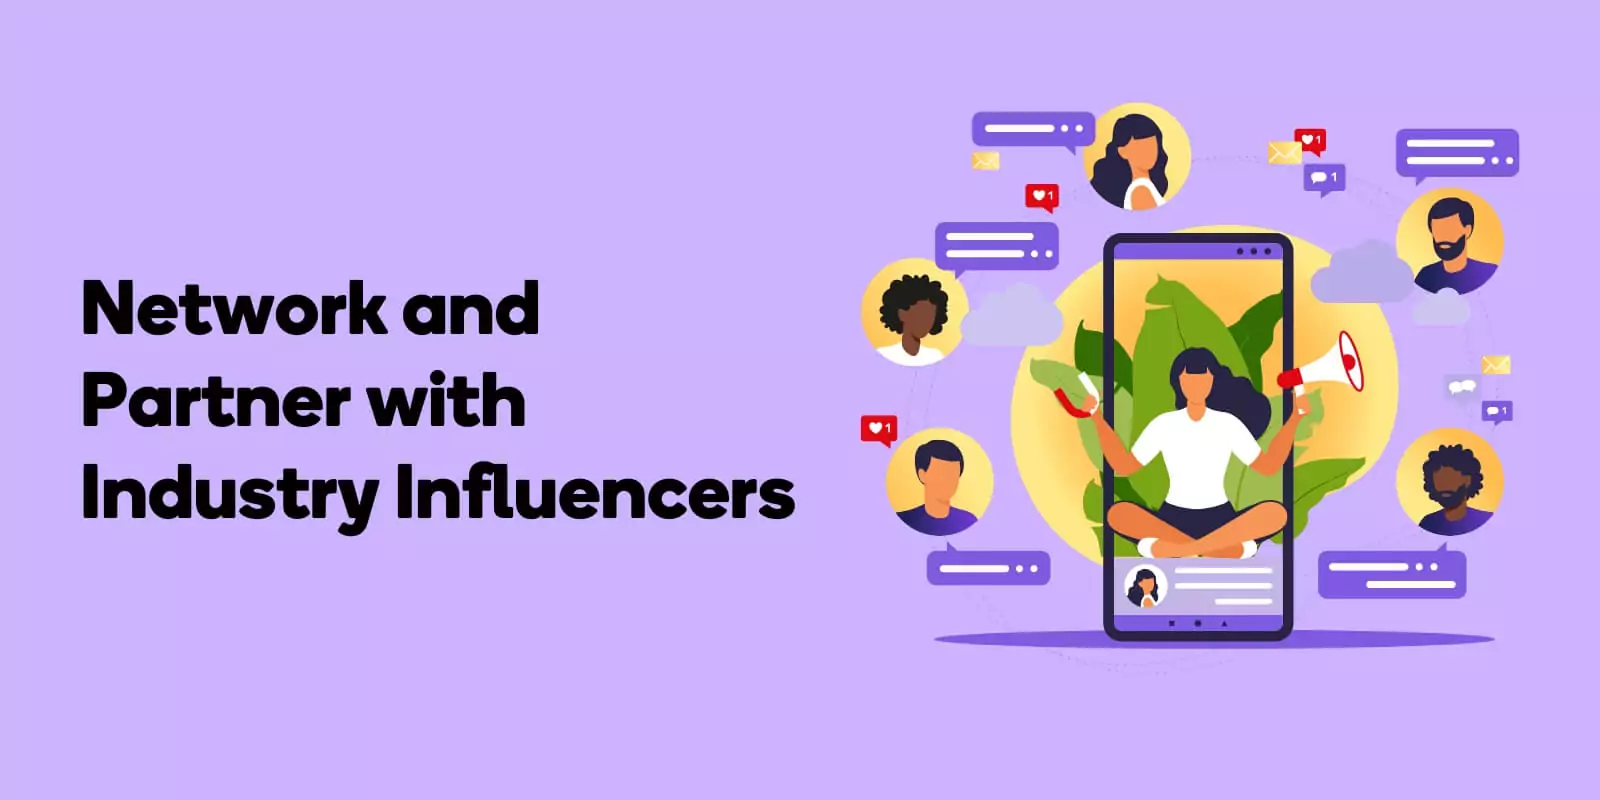 Network and Partner with Industry Influencers